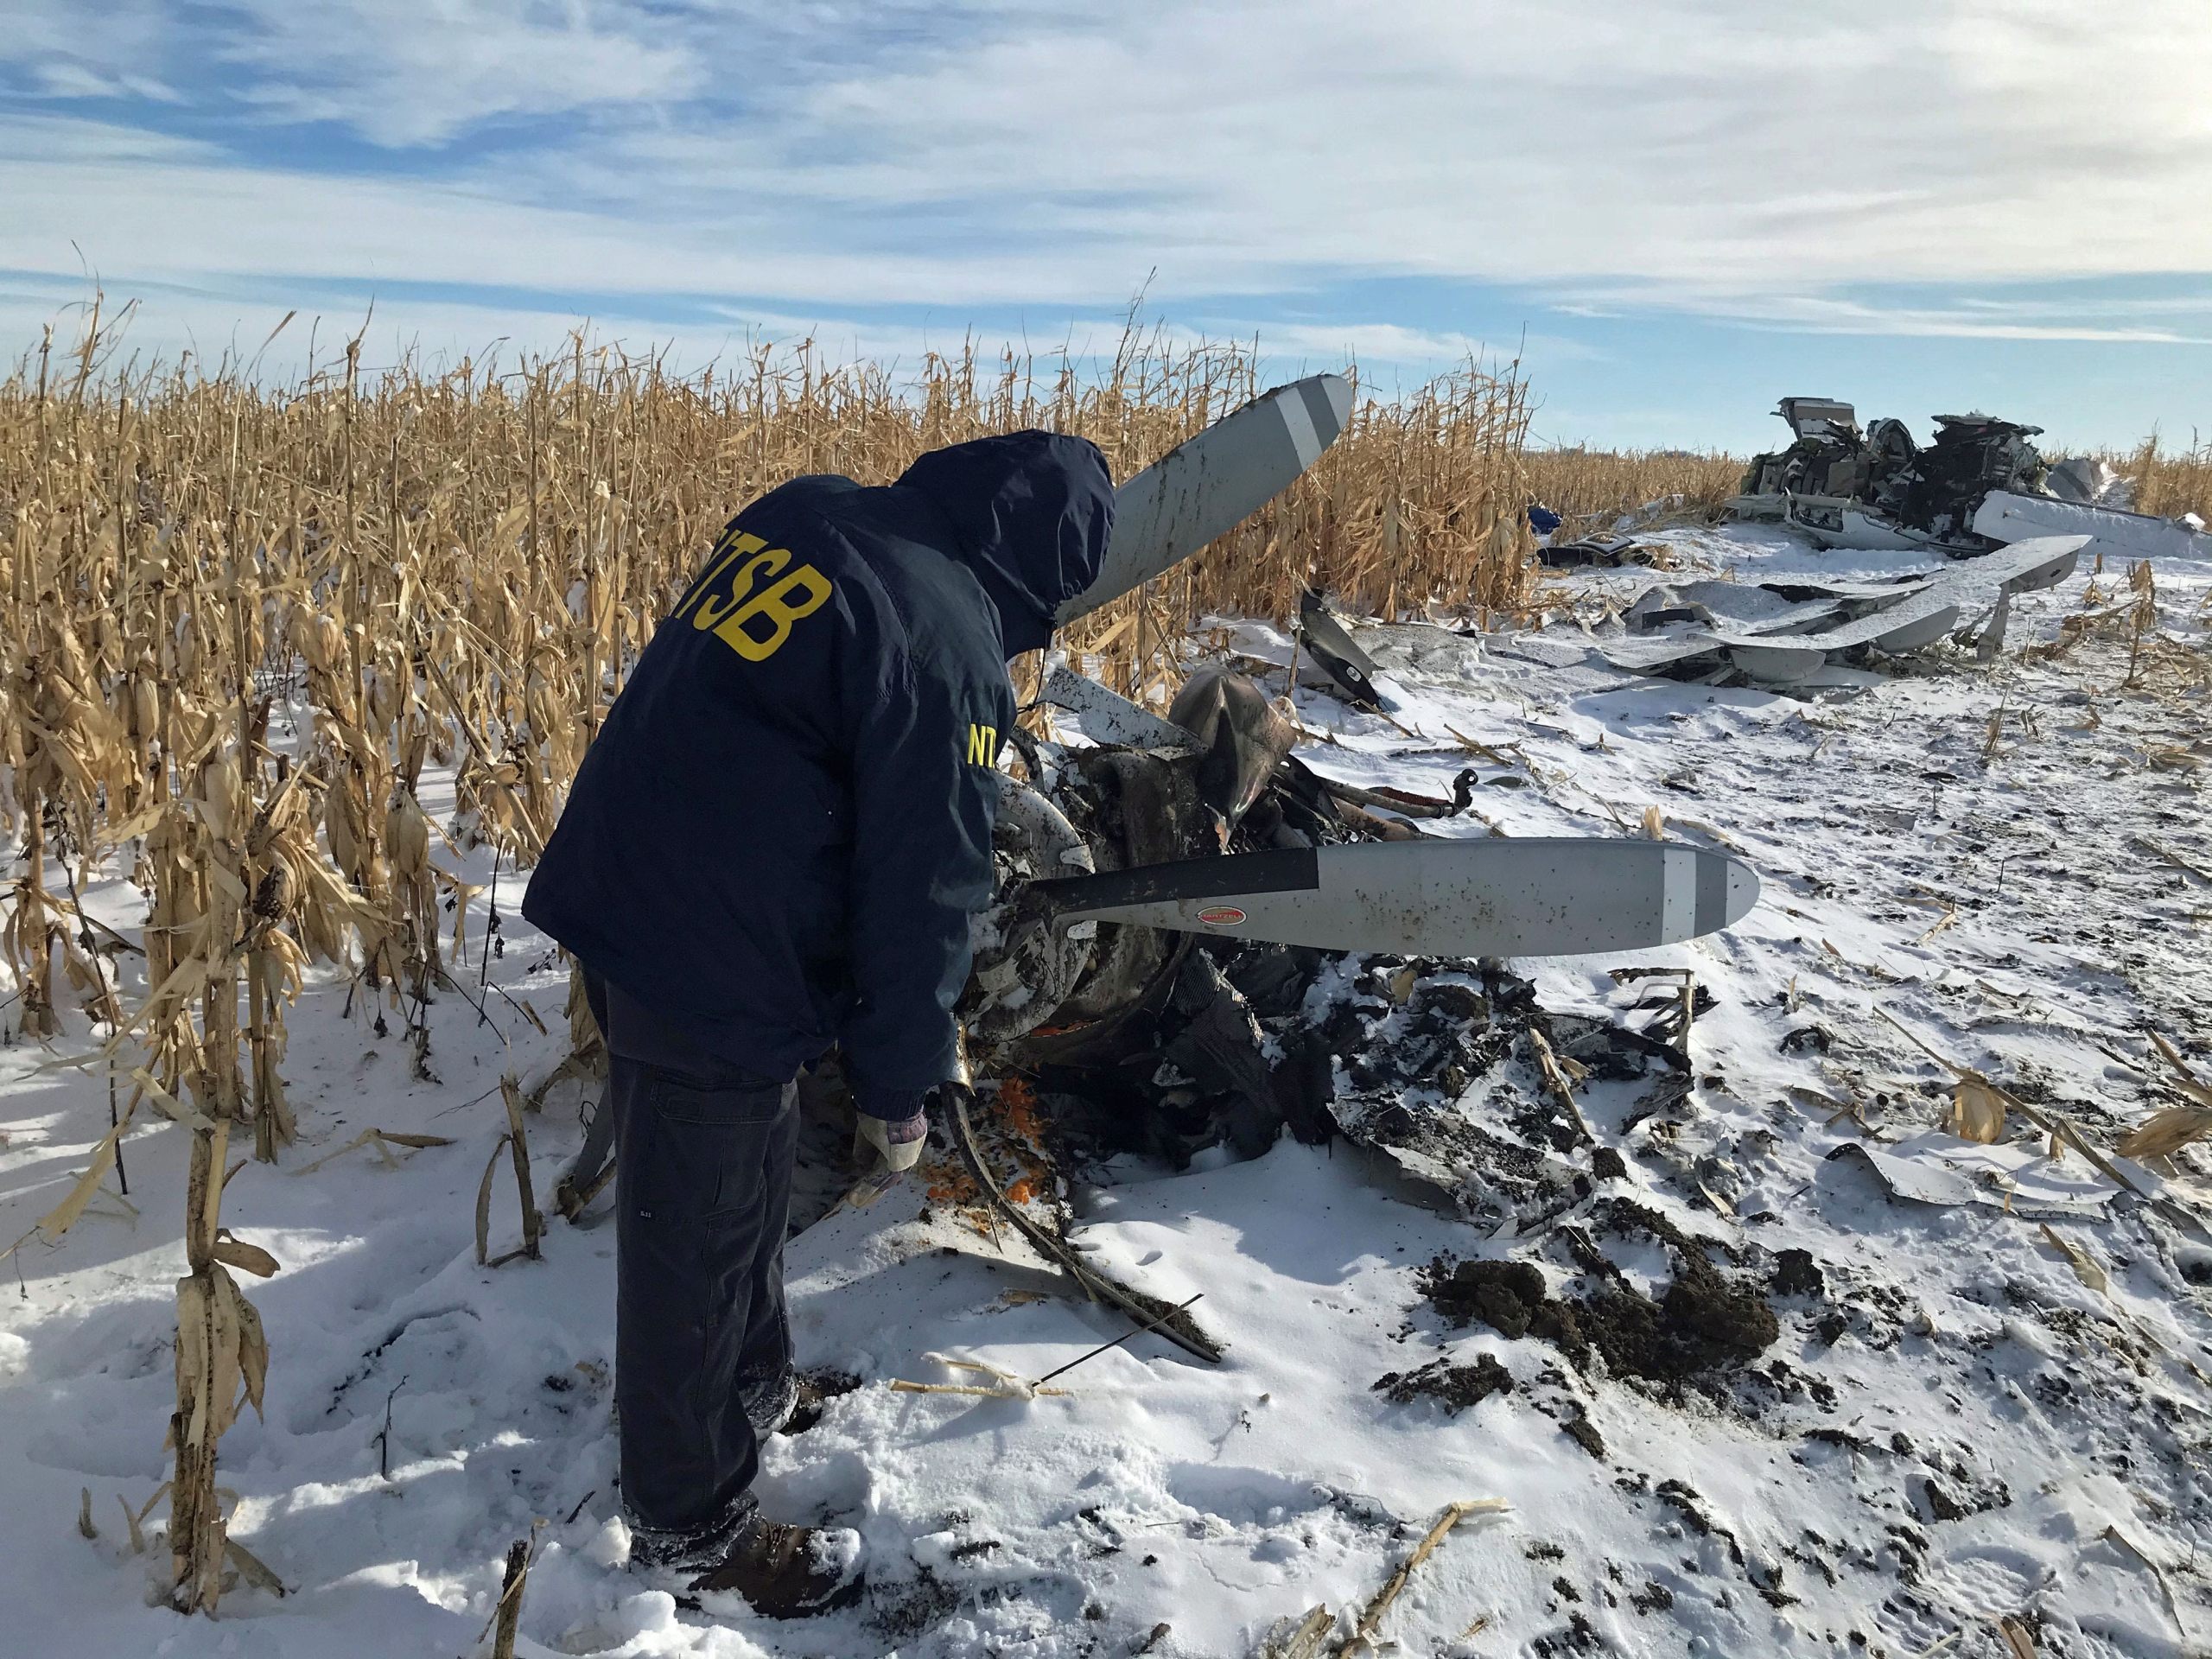 National Transportation Safety Board Says 2019 Plane Crash Near Chamberlain Caused By Surface Icing On Plane